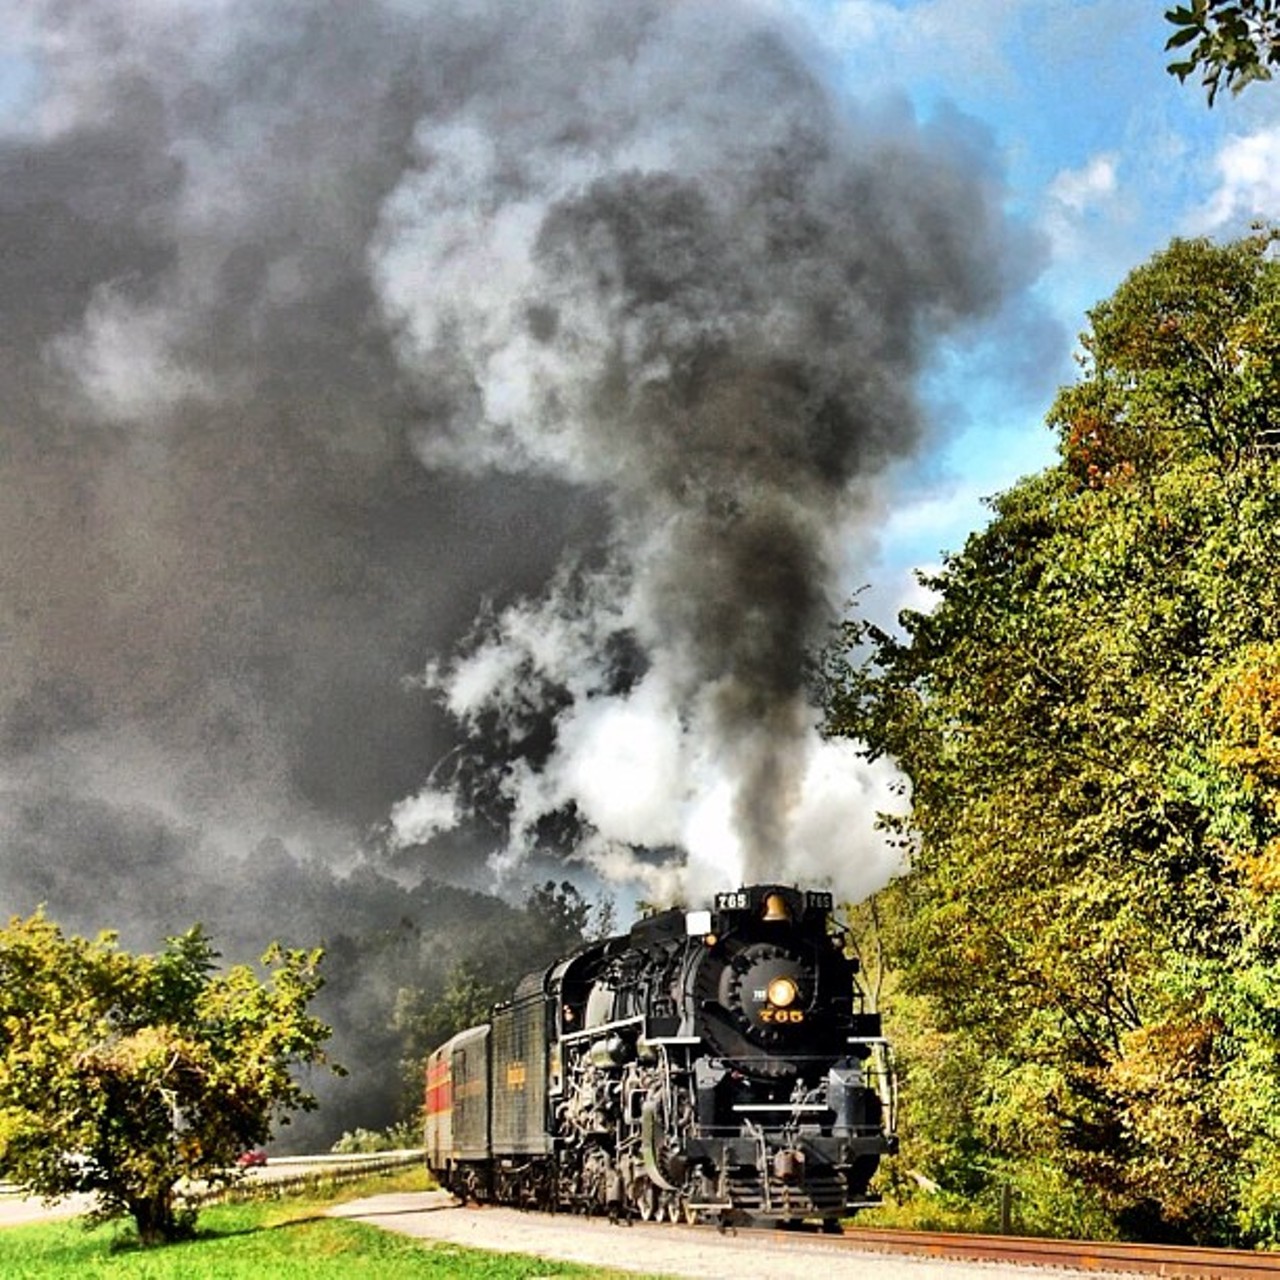 Get buzzed on the Cuyahoga Valley Scenic Railroad in this month's installment of the Ales on Rails event. The train ride kicks off at the Rockside Road station in Independence today at 4:15 p.m. and wends its way through Cuyahoga Valley National Park for two super-scenic hours. You can sample five unique canned beers, along with with an appetizer prepared by Moe's Restaurant of Cuyahoga Falls. Tickets are $45 to $80. (Allard)